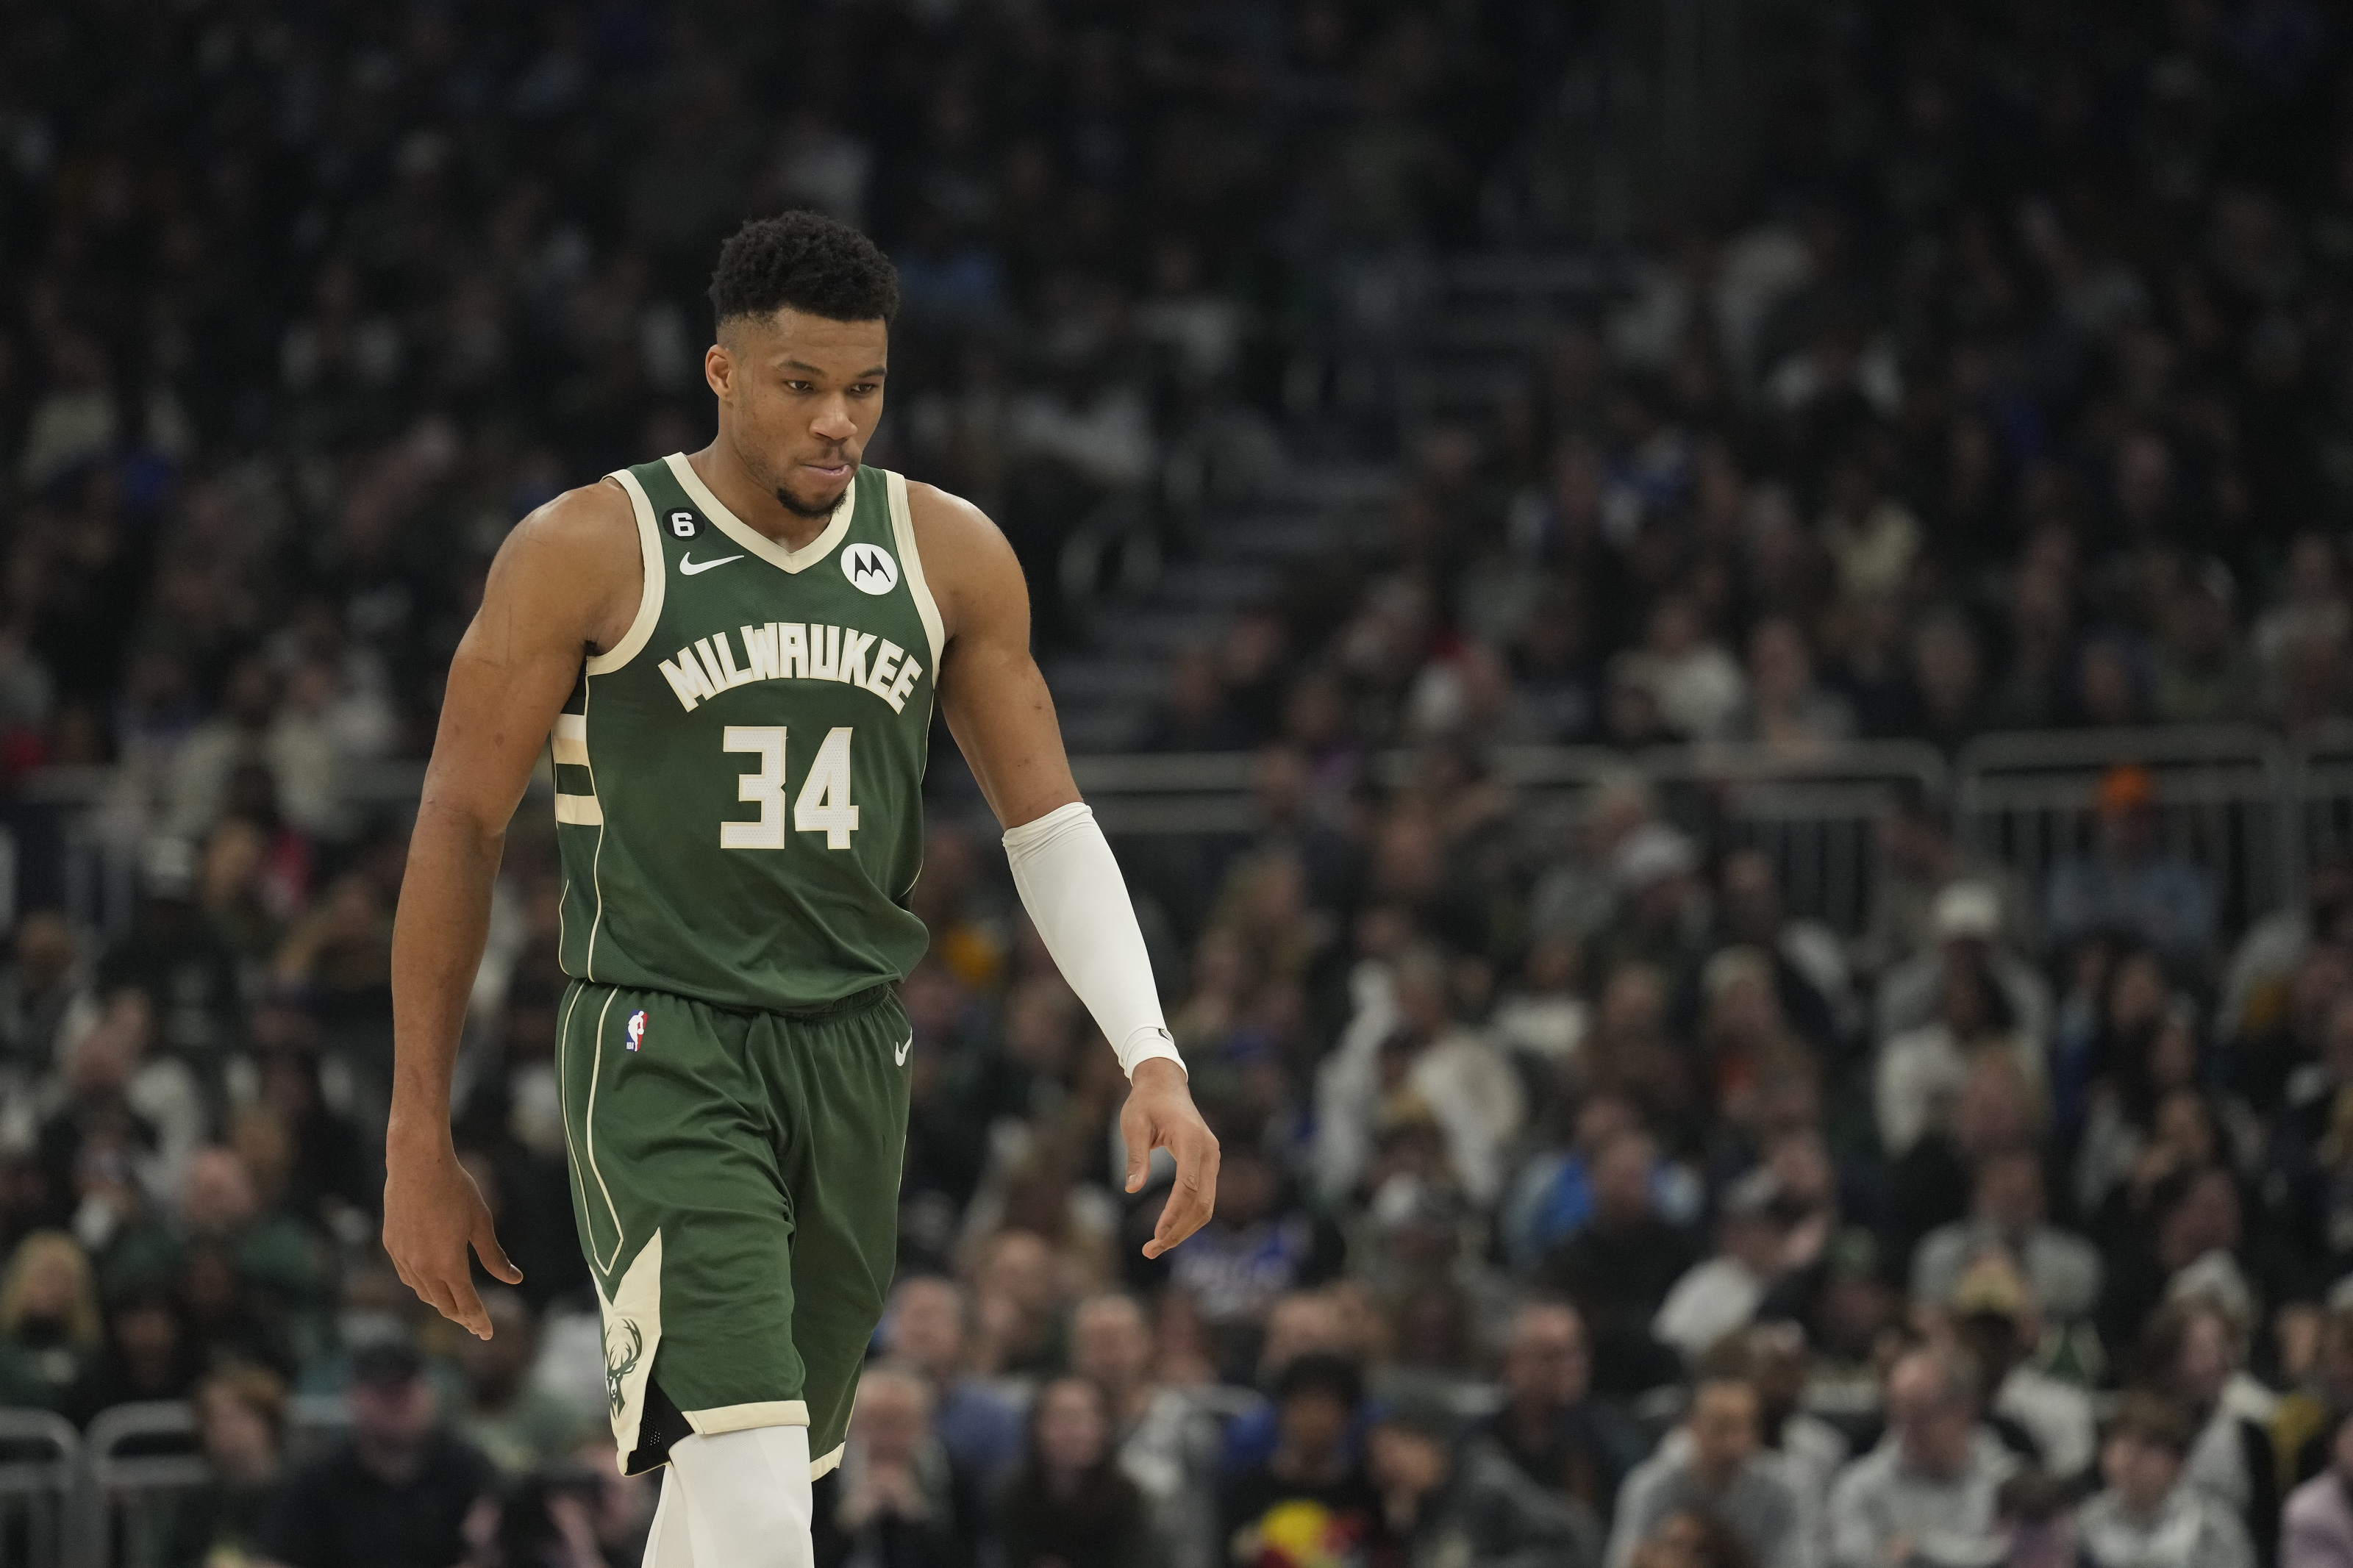 BasketNews on X: When Giannis Antetokounmpo suited up for the